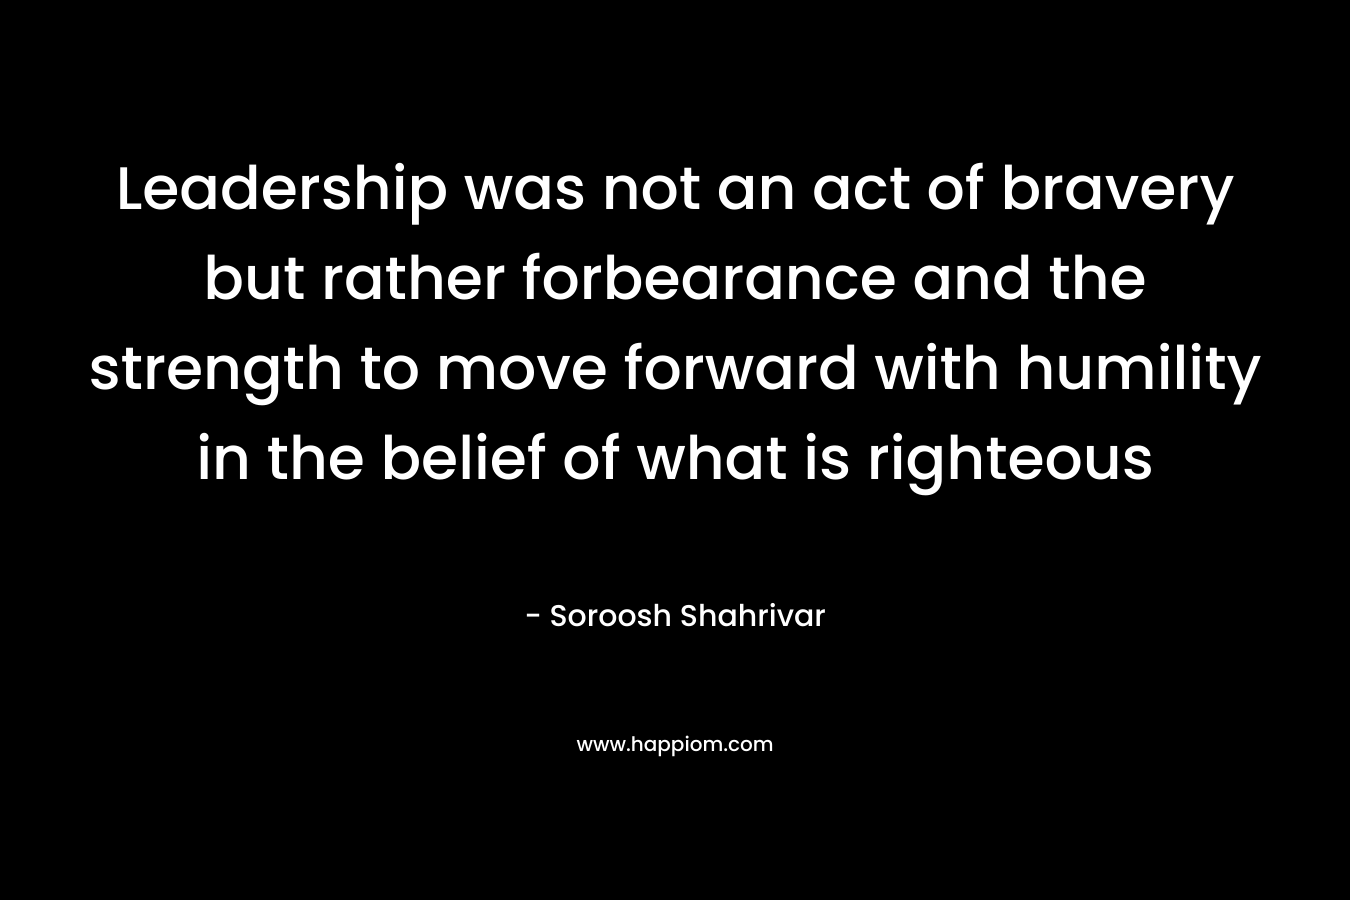 Leadership was not an act of bravery but rather forbearance and the strength to move forward with humility in the belief of what is righteous – Soroosh Shahrivar